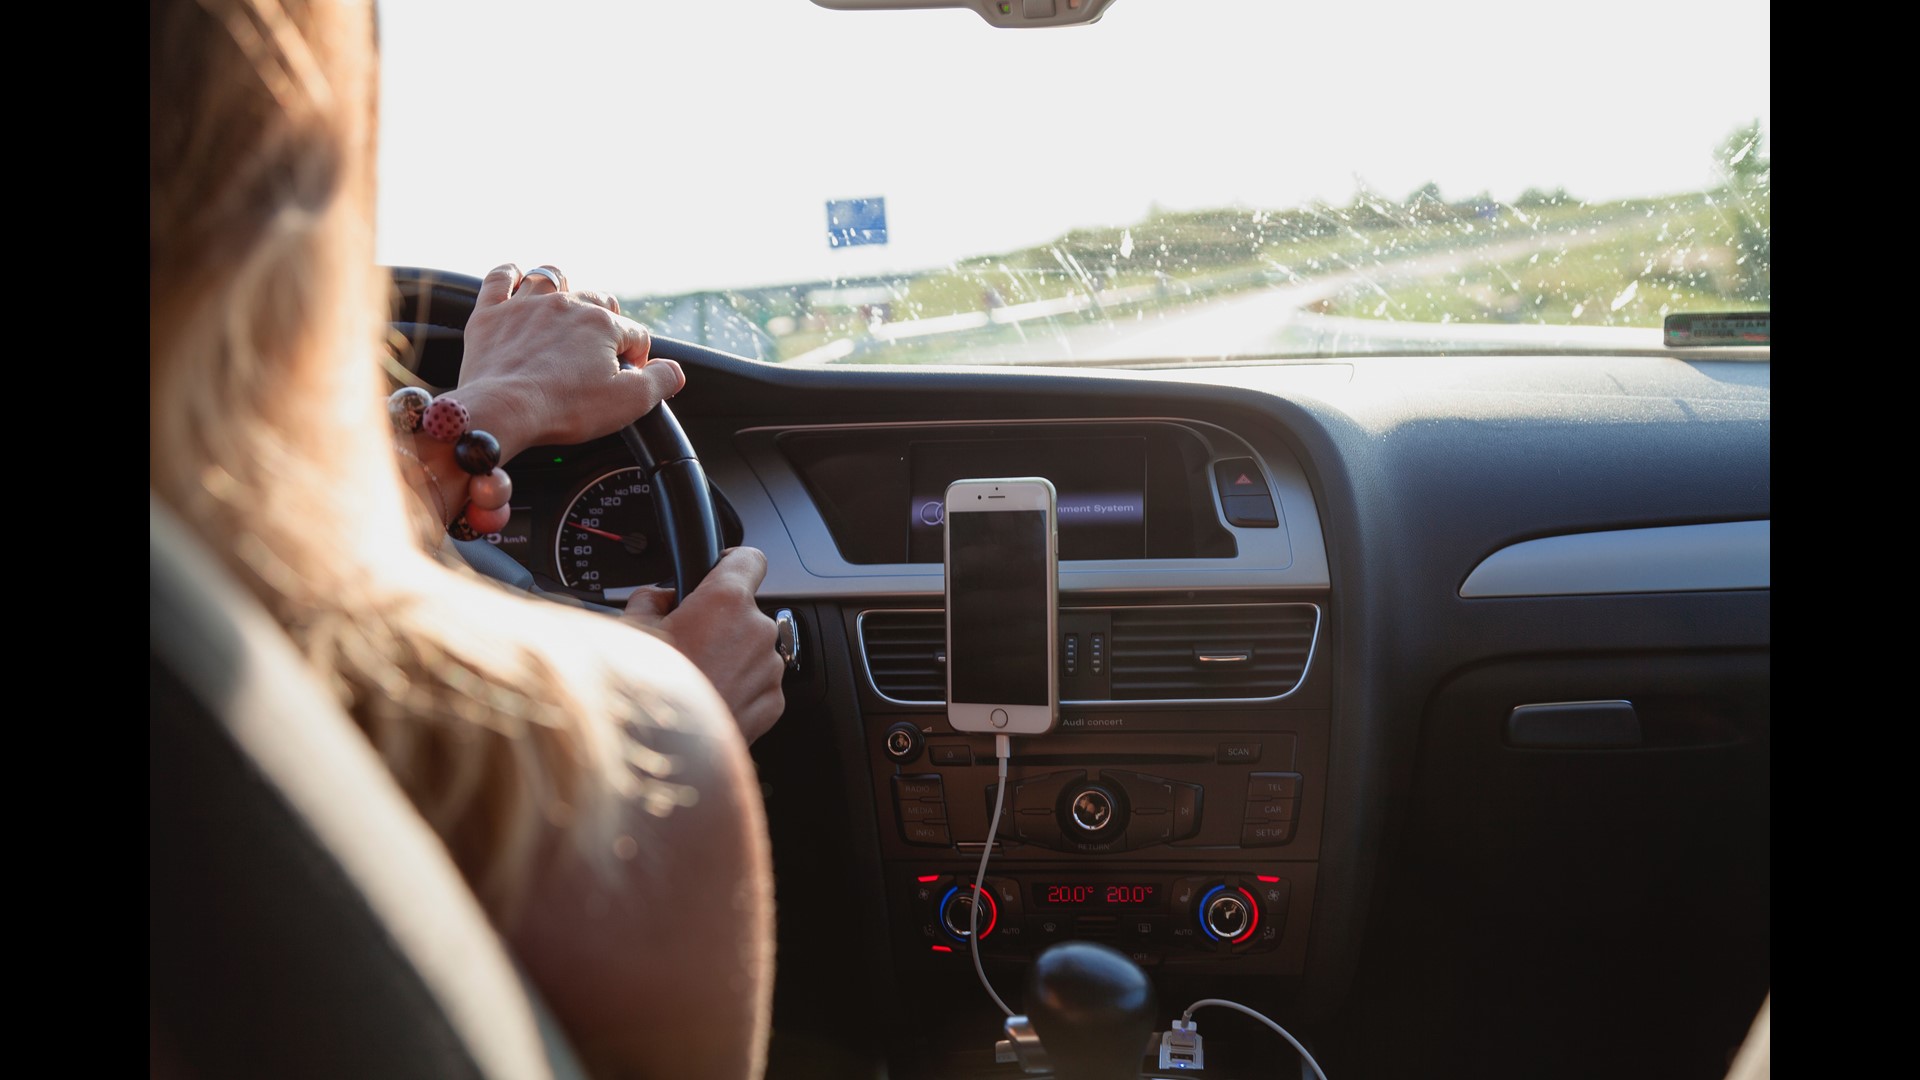 It's now illegal to hold a cell phone with any part of your body while driving in Tennessee.